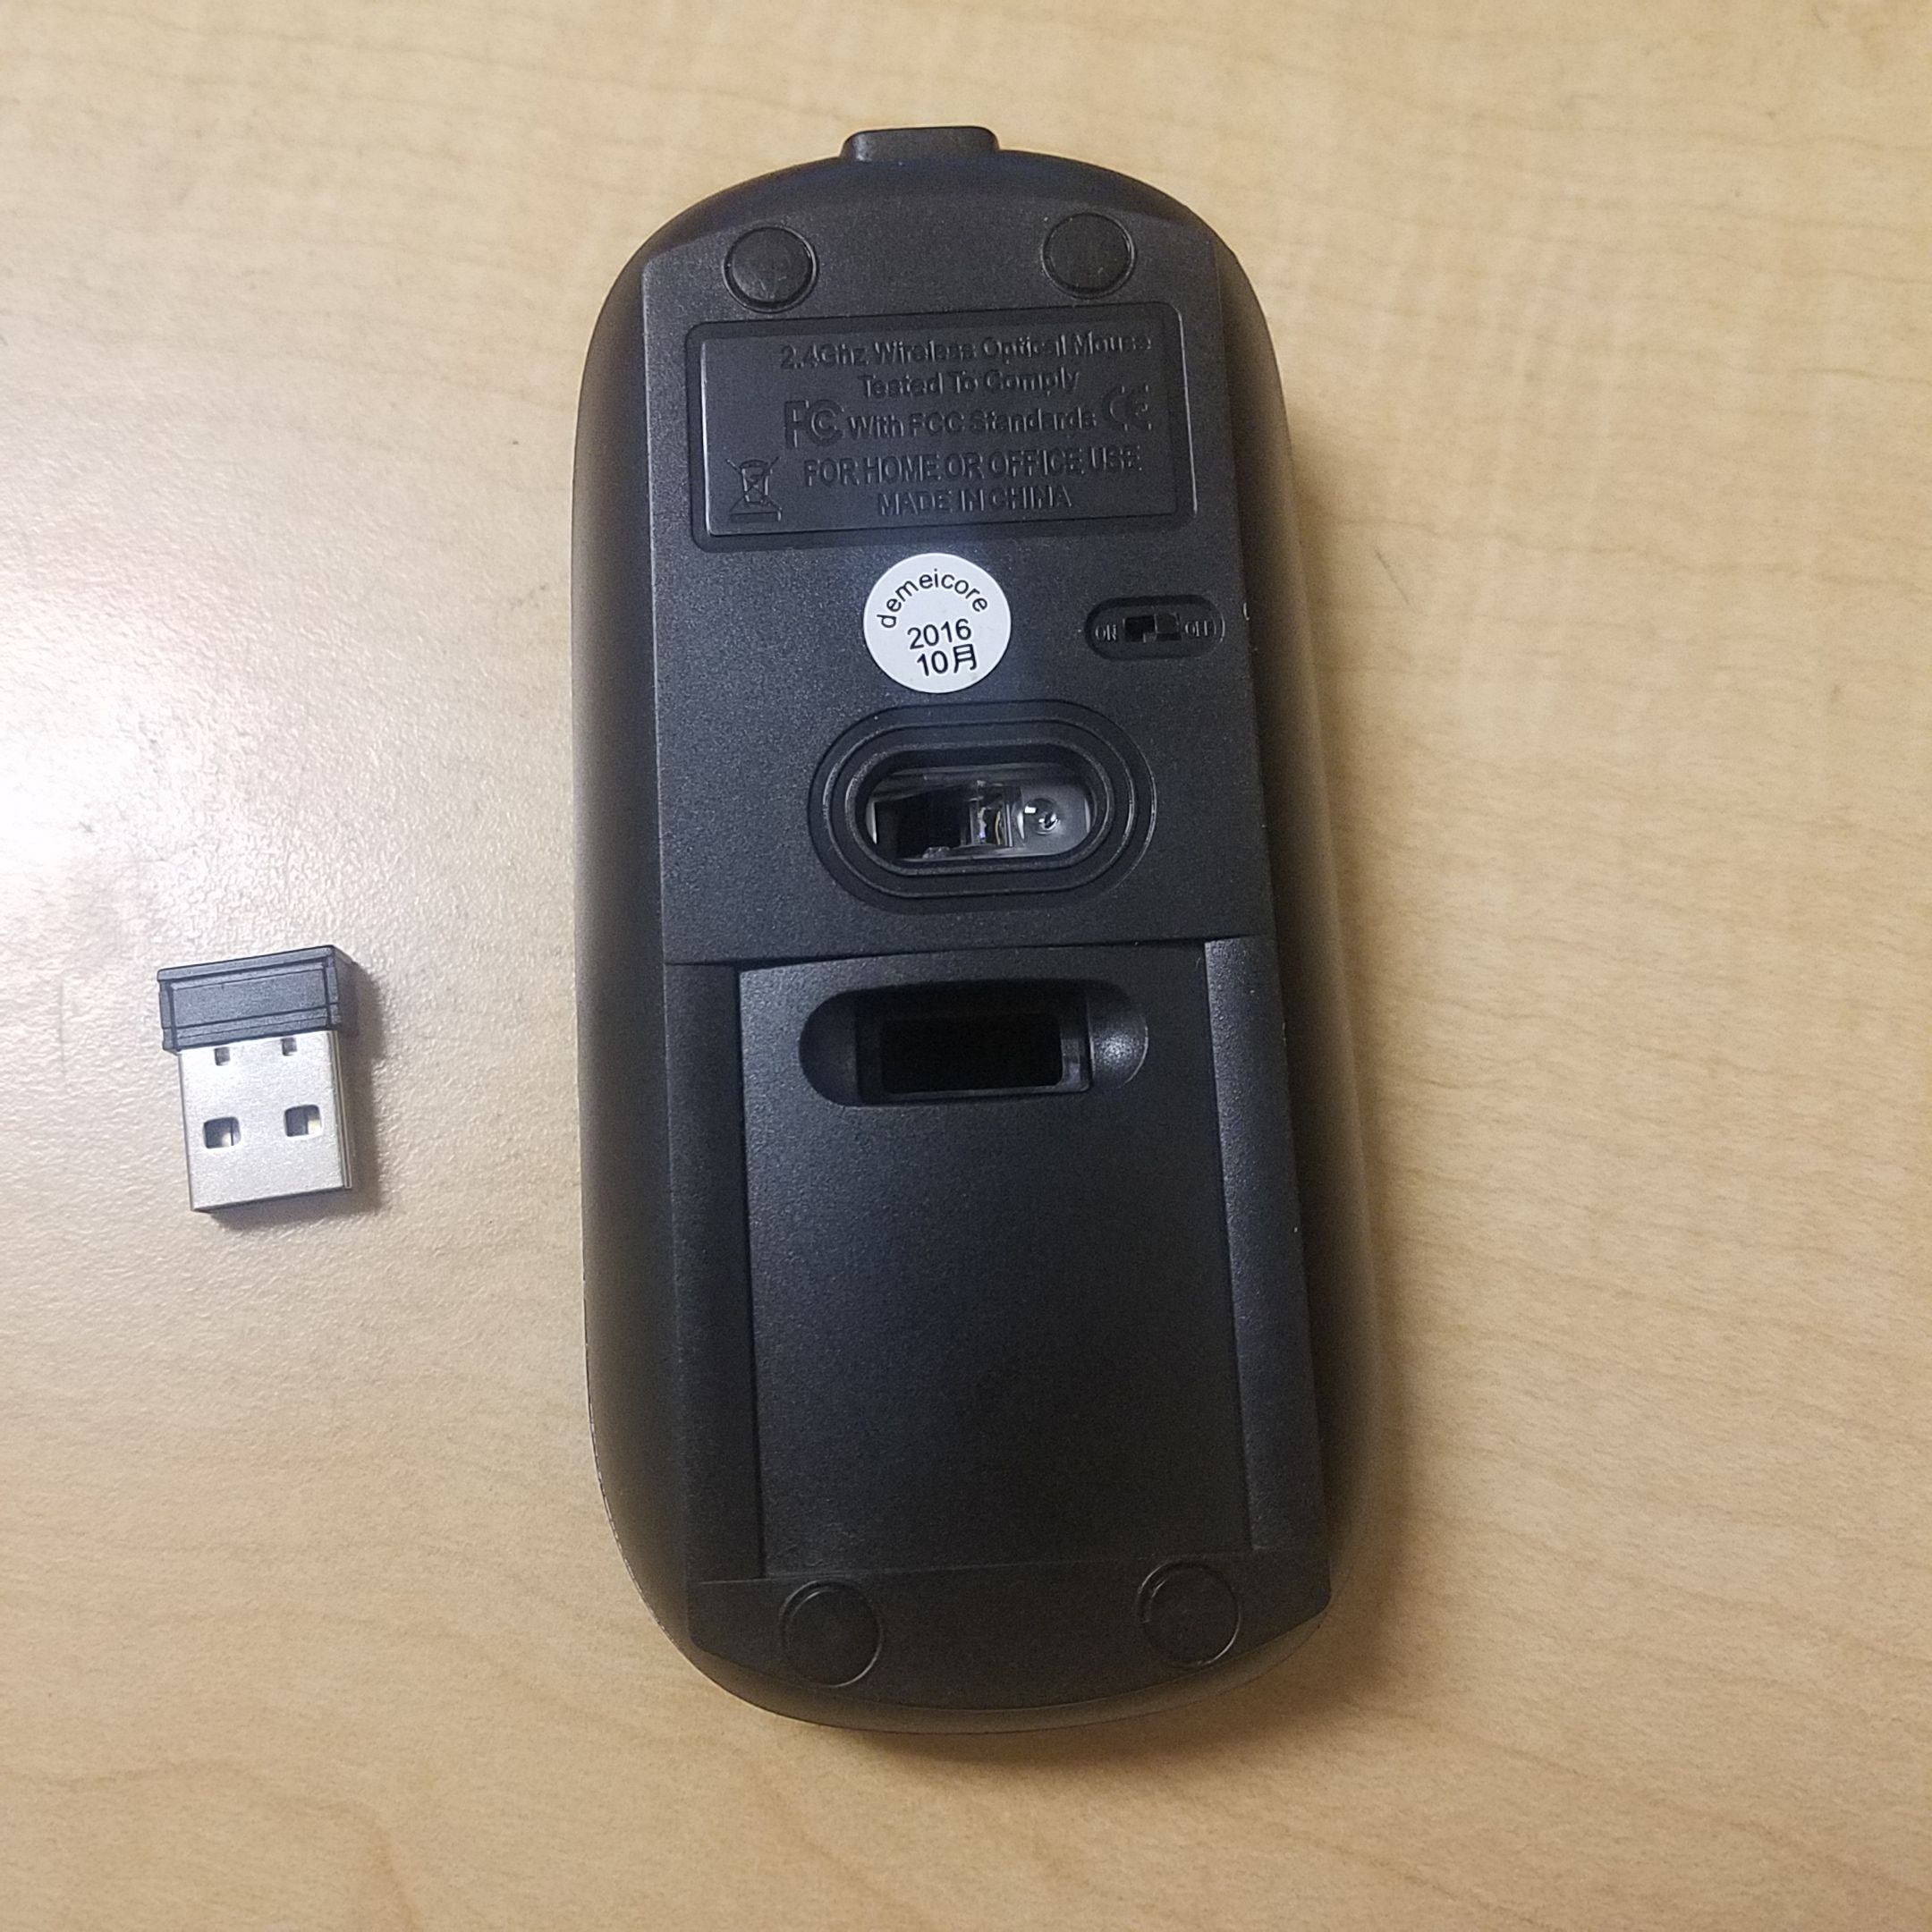 how to disassemble microsoft wireless mouse 1000